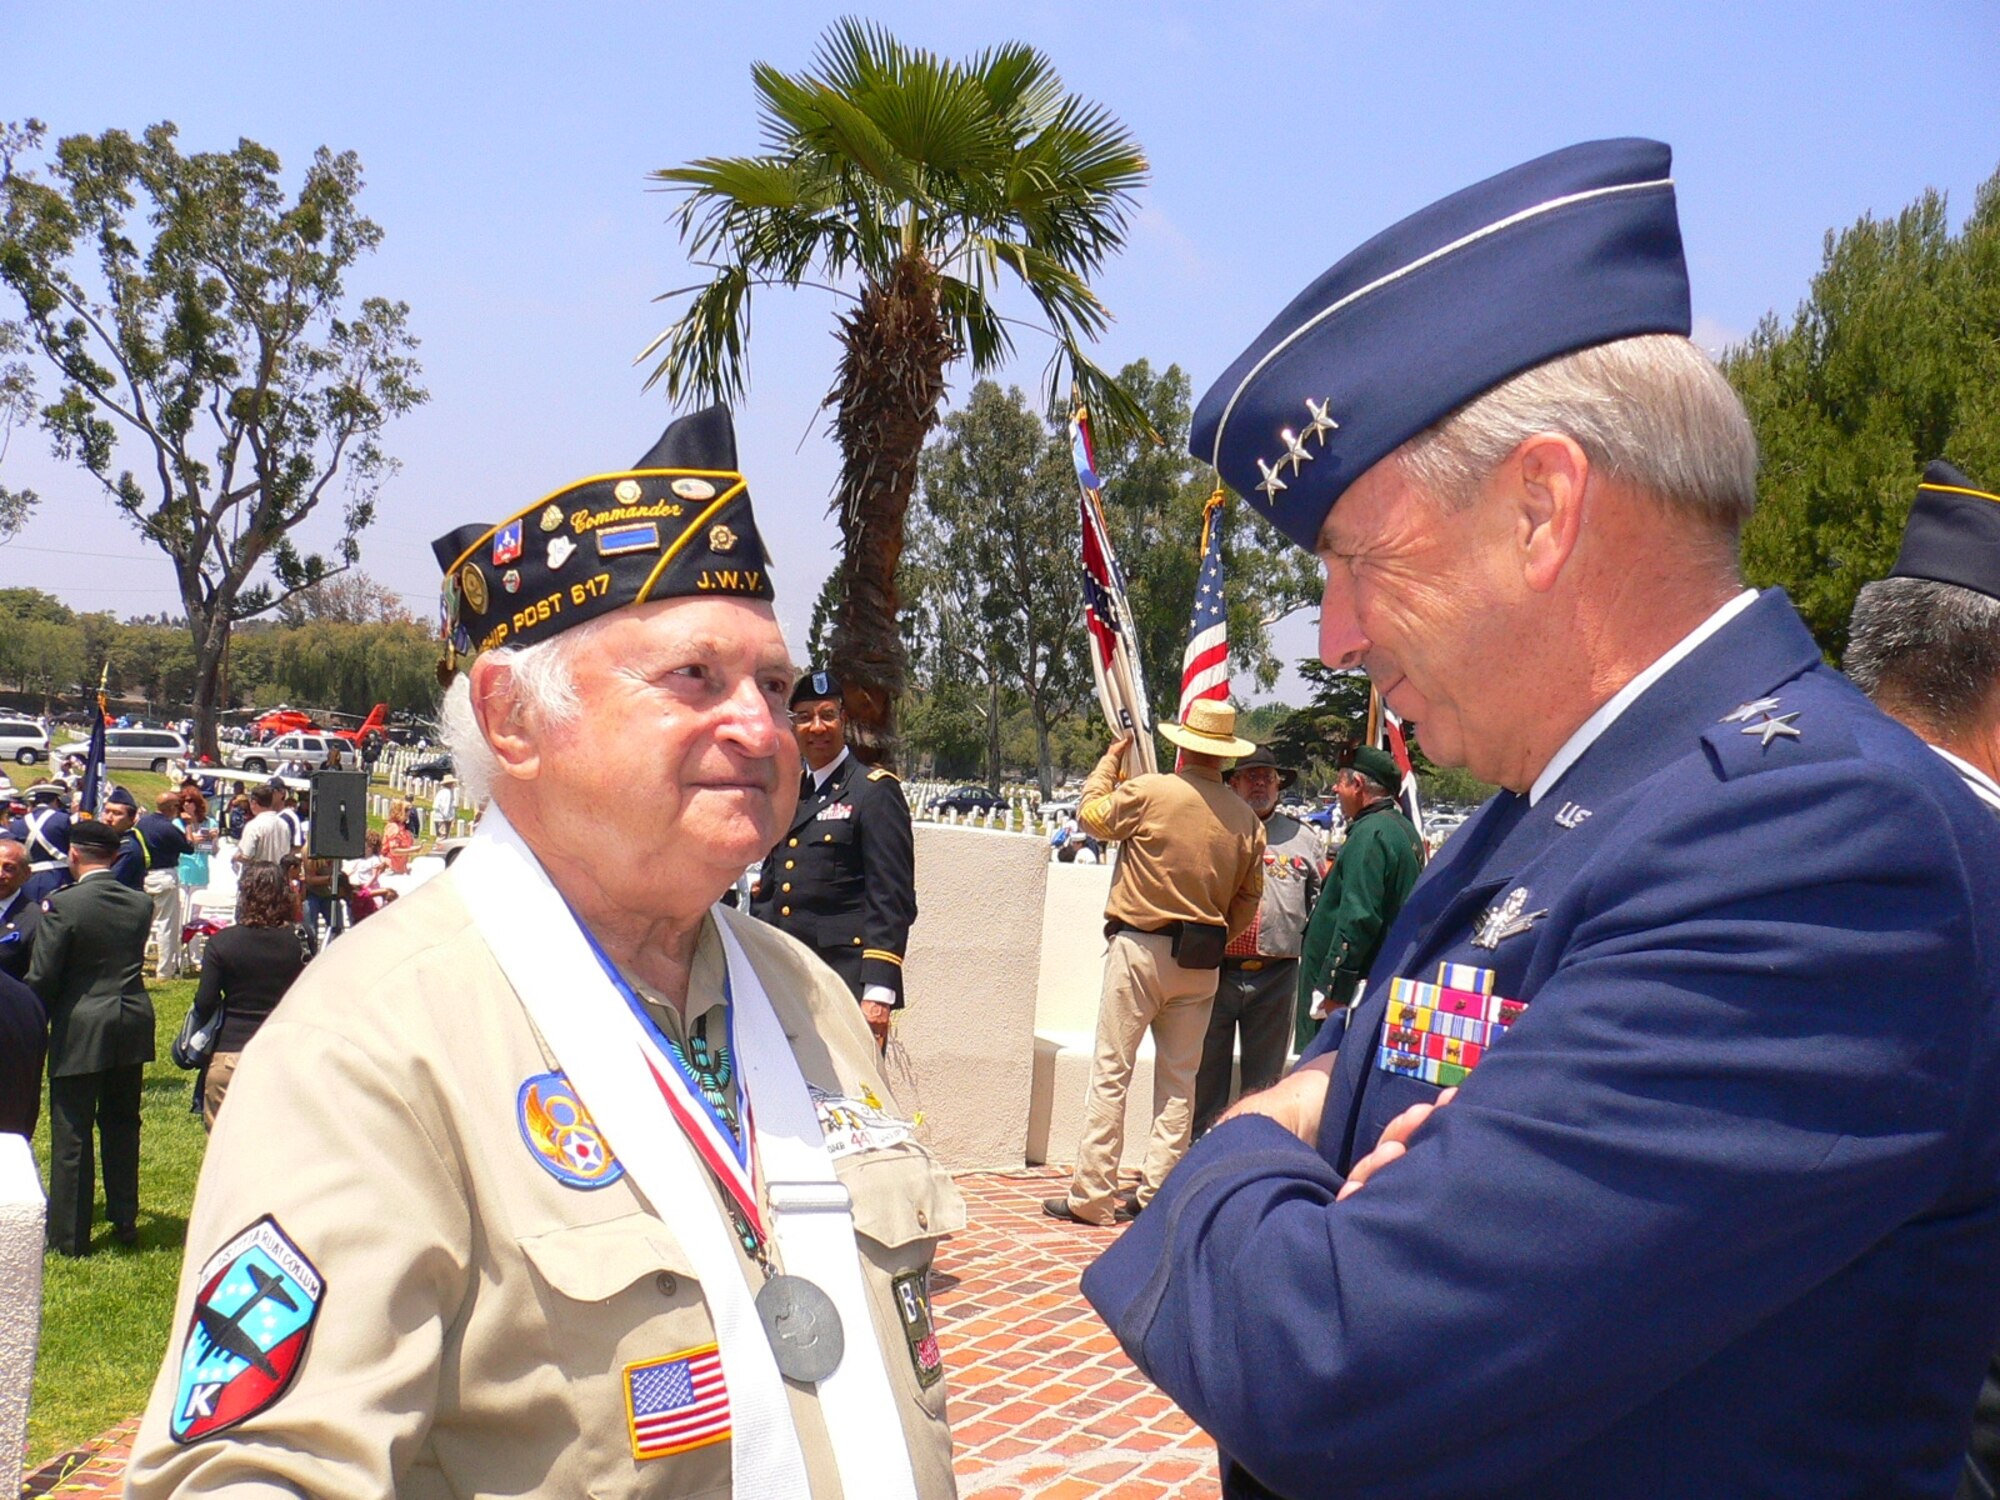 Lt. Gen. Michael Hamel, SMC Commander, chats with a WWII B-17 aircrew member at this year’s Los Angeles National Cemetery’s Memorial Day salute, May 28. The general was the keynote speaker at the event.